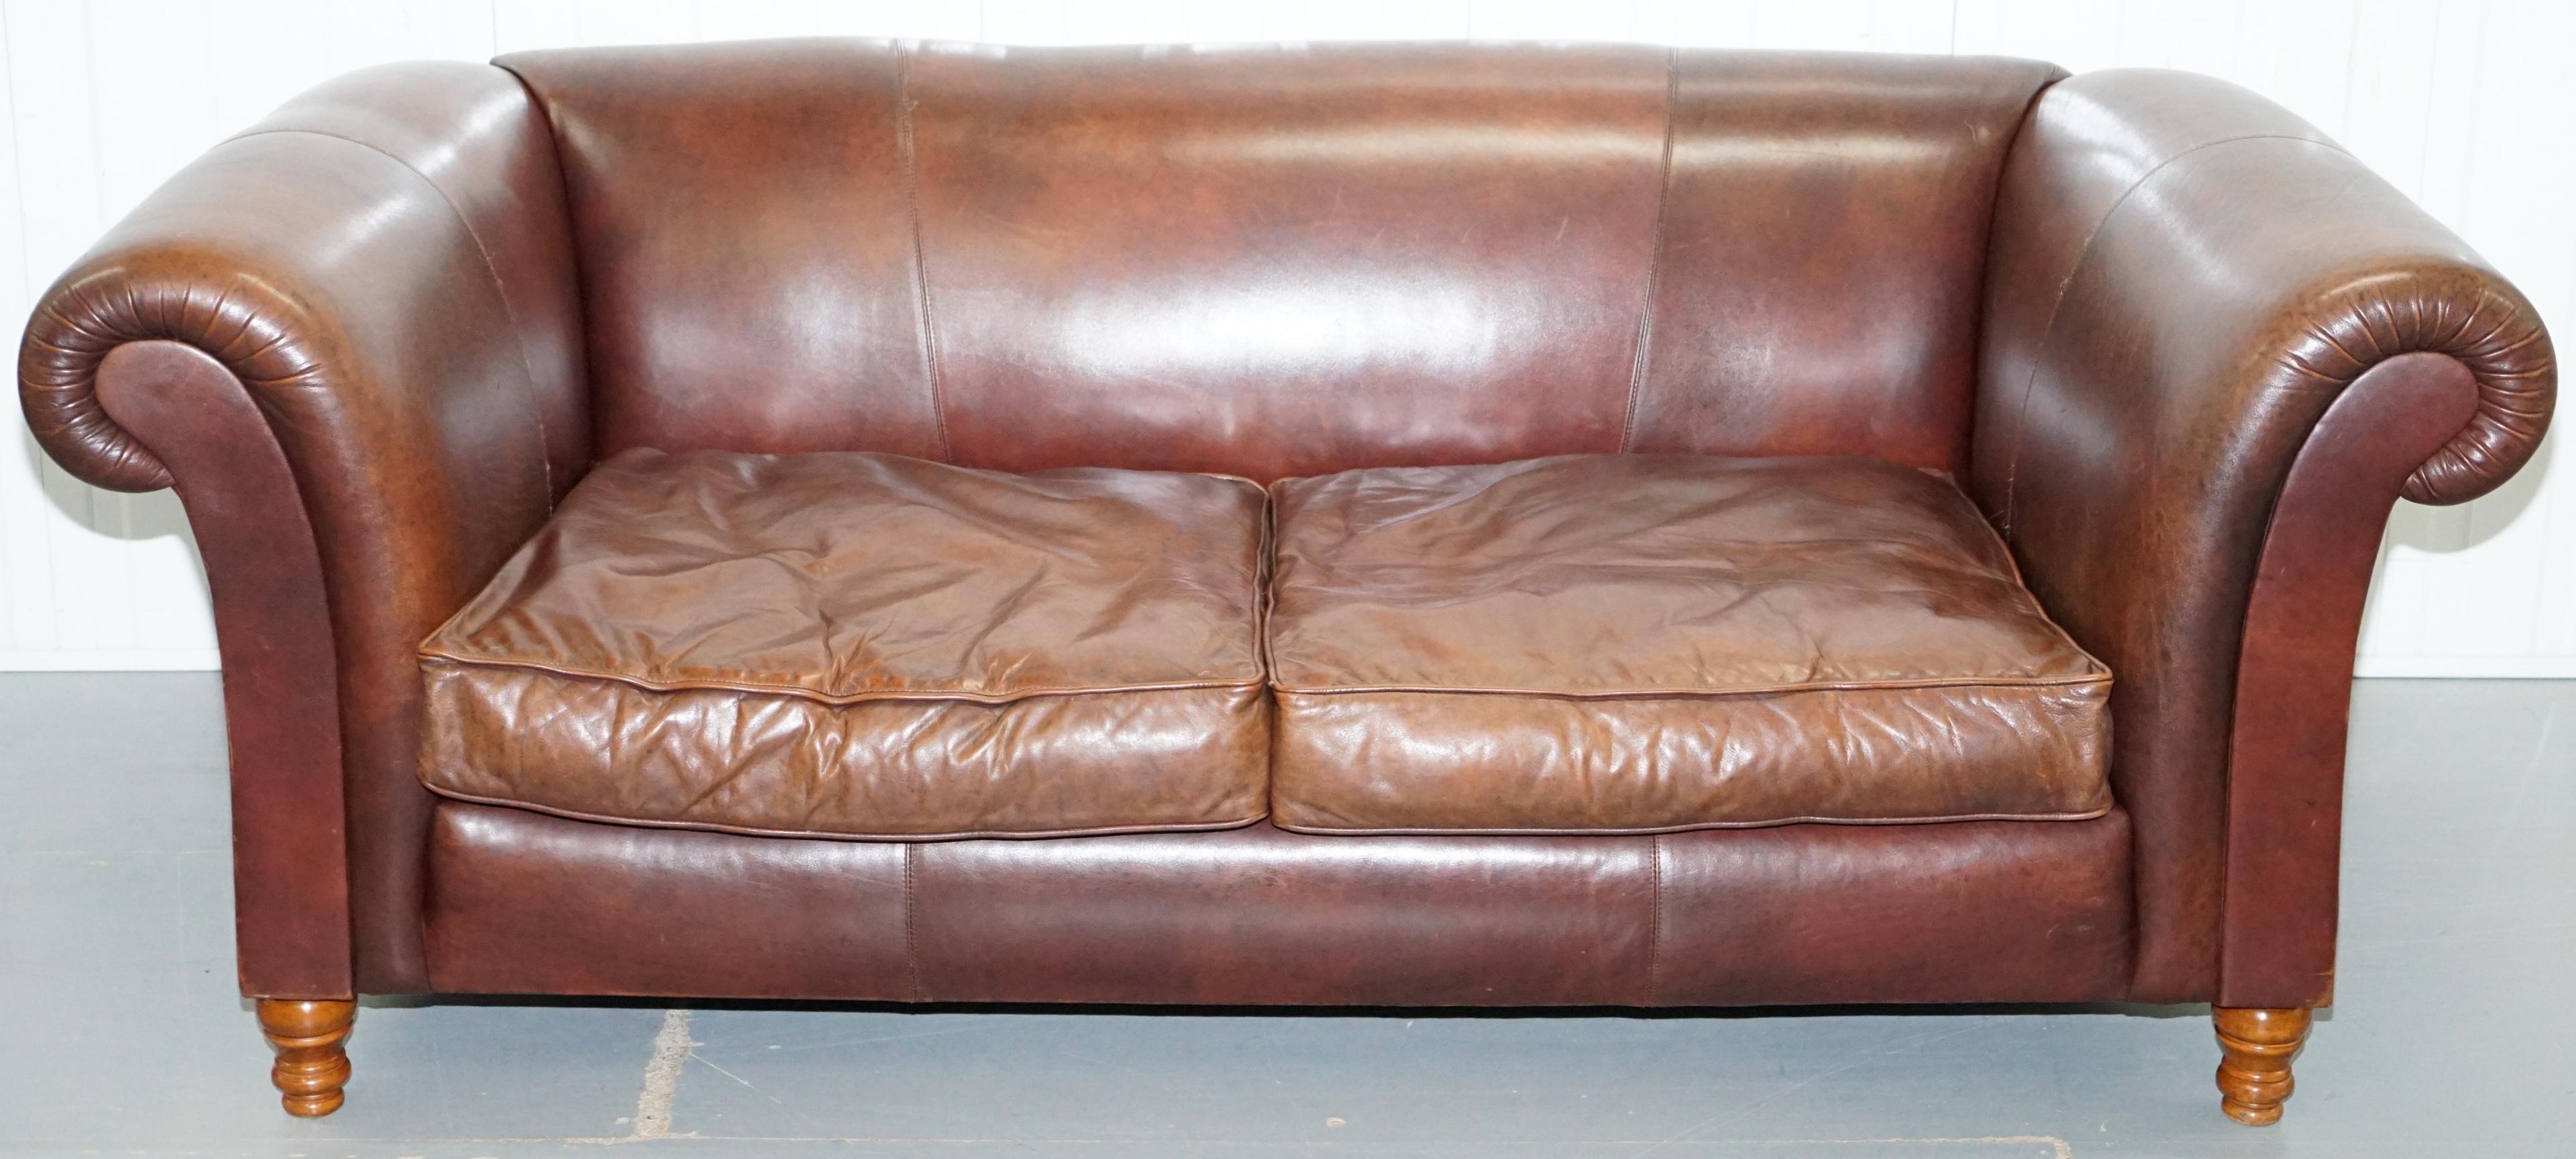 We are delighted to offer for sale this lovely vintage Buffalo leather oversized three-seat brown leather sofa with feather filled cushions

This sofa is all singing, all dancing and super comfortable, it has the fully sprung front edge which is